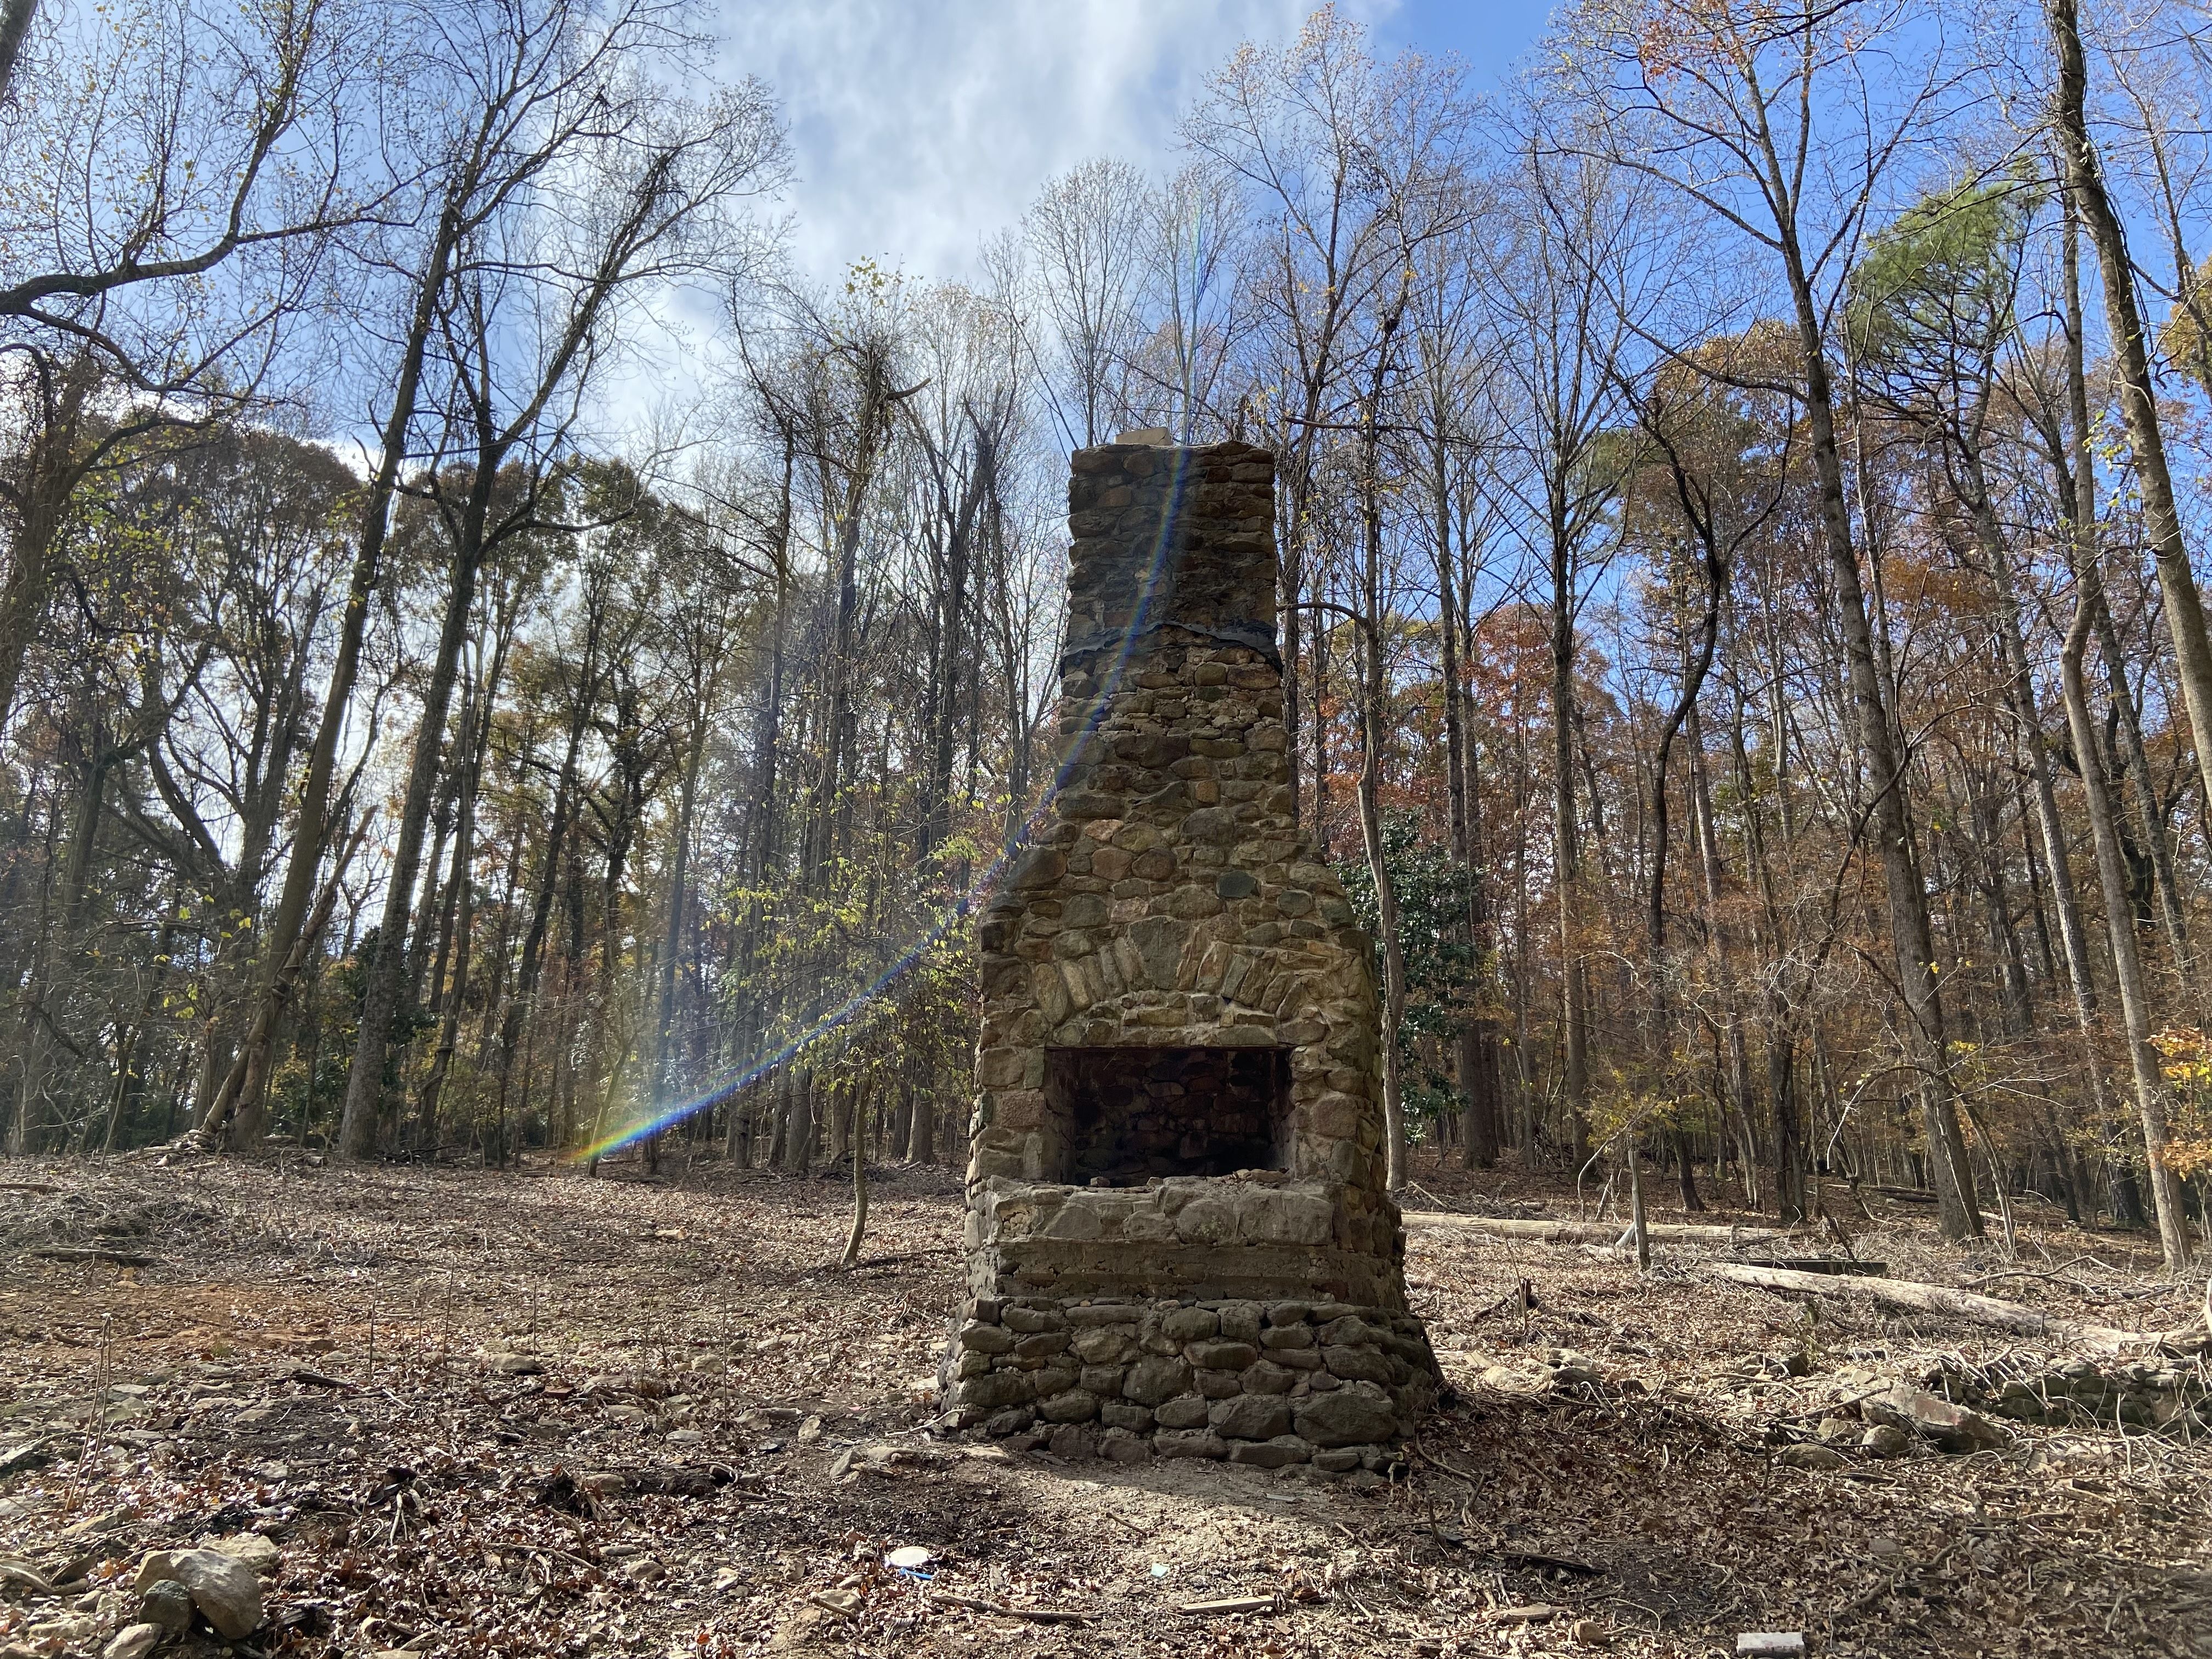 A lone stone chimney stands in a cleared section of the woods